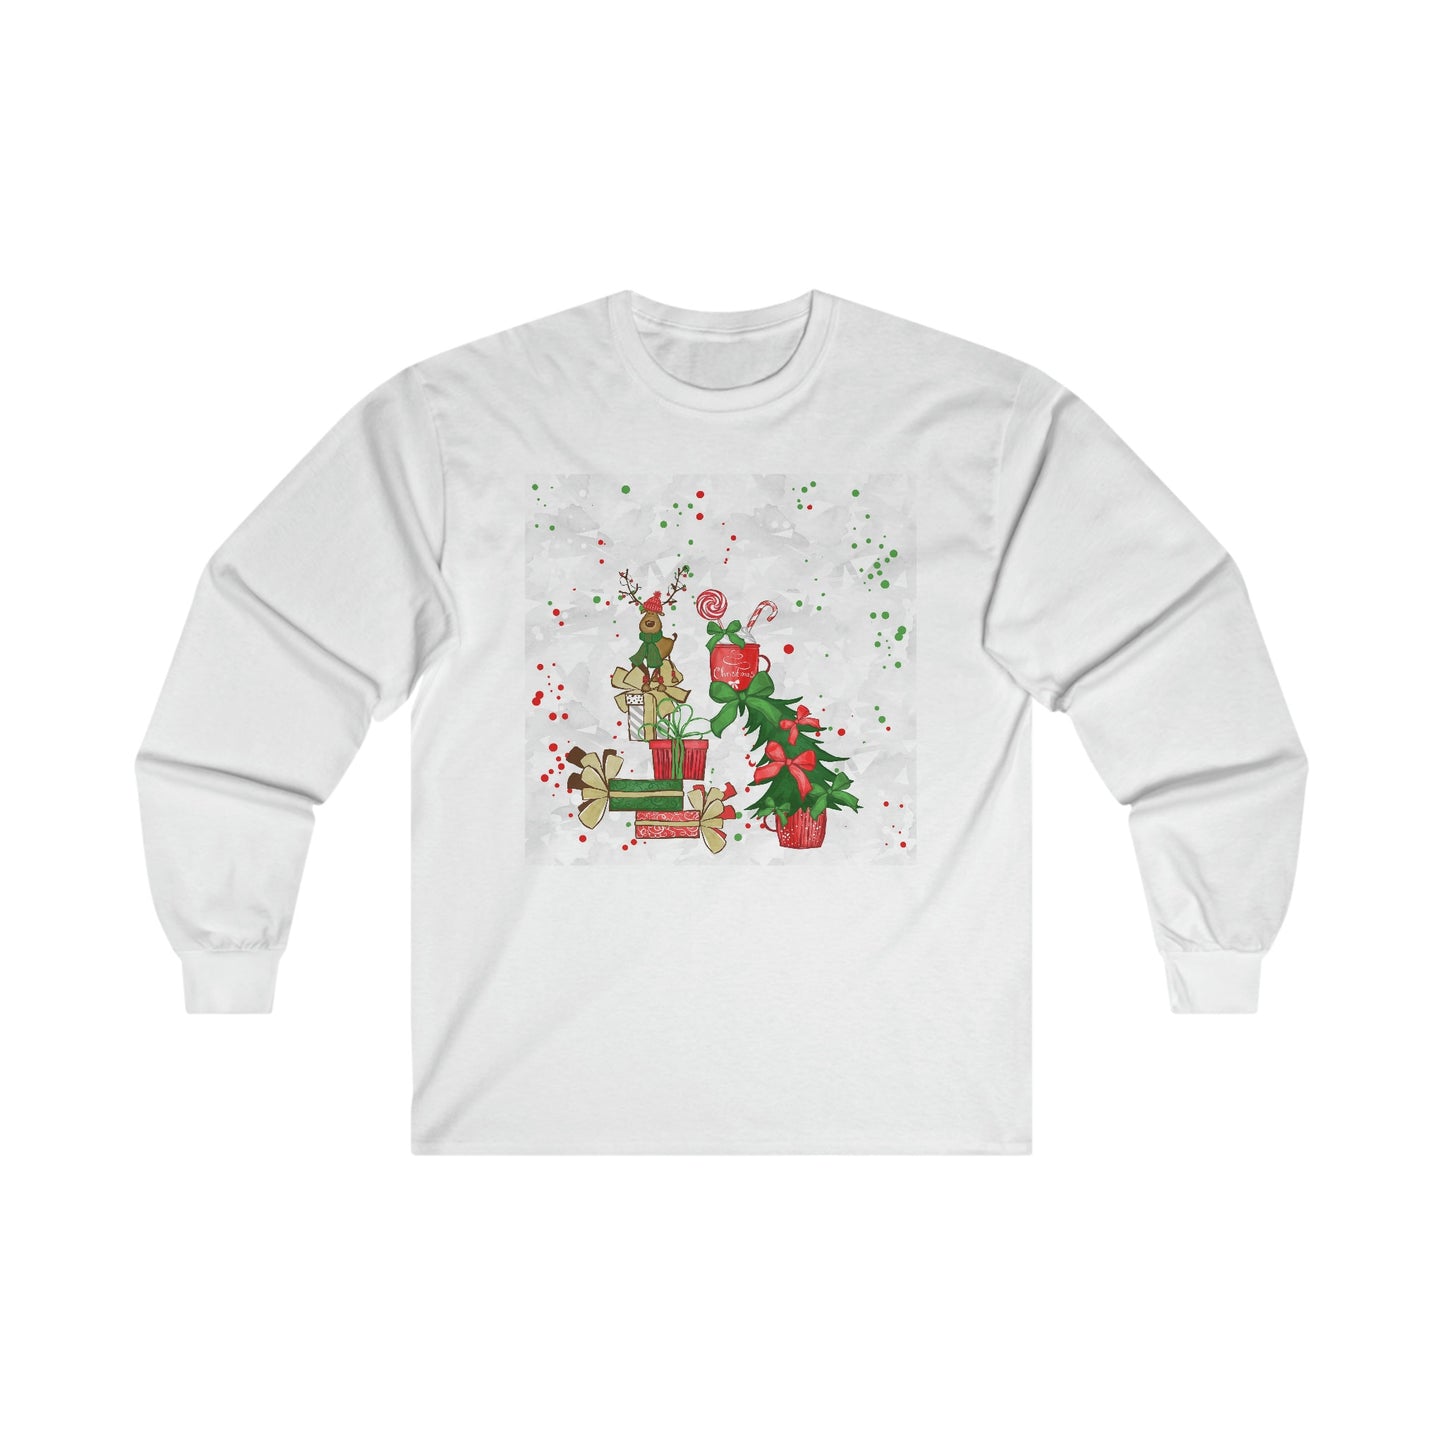 Reindeer Christmas -  Tree, Candy Cane, Presents - Funny Christmas - Ultra Cotton Long Sleeve Tee